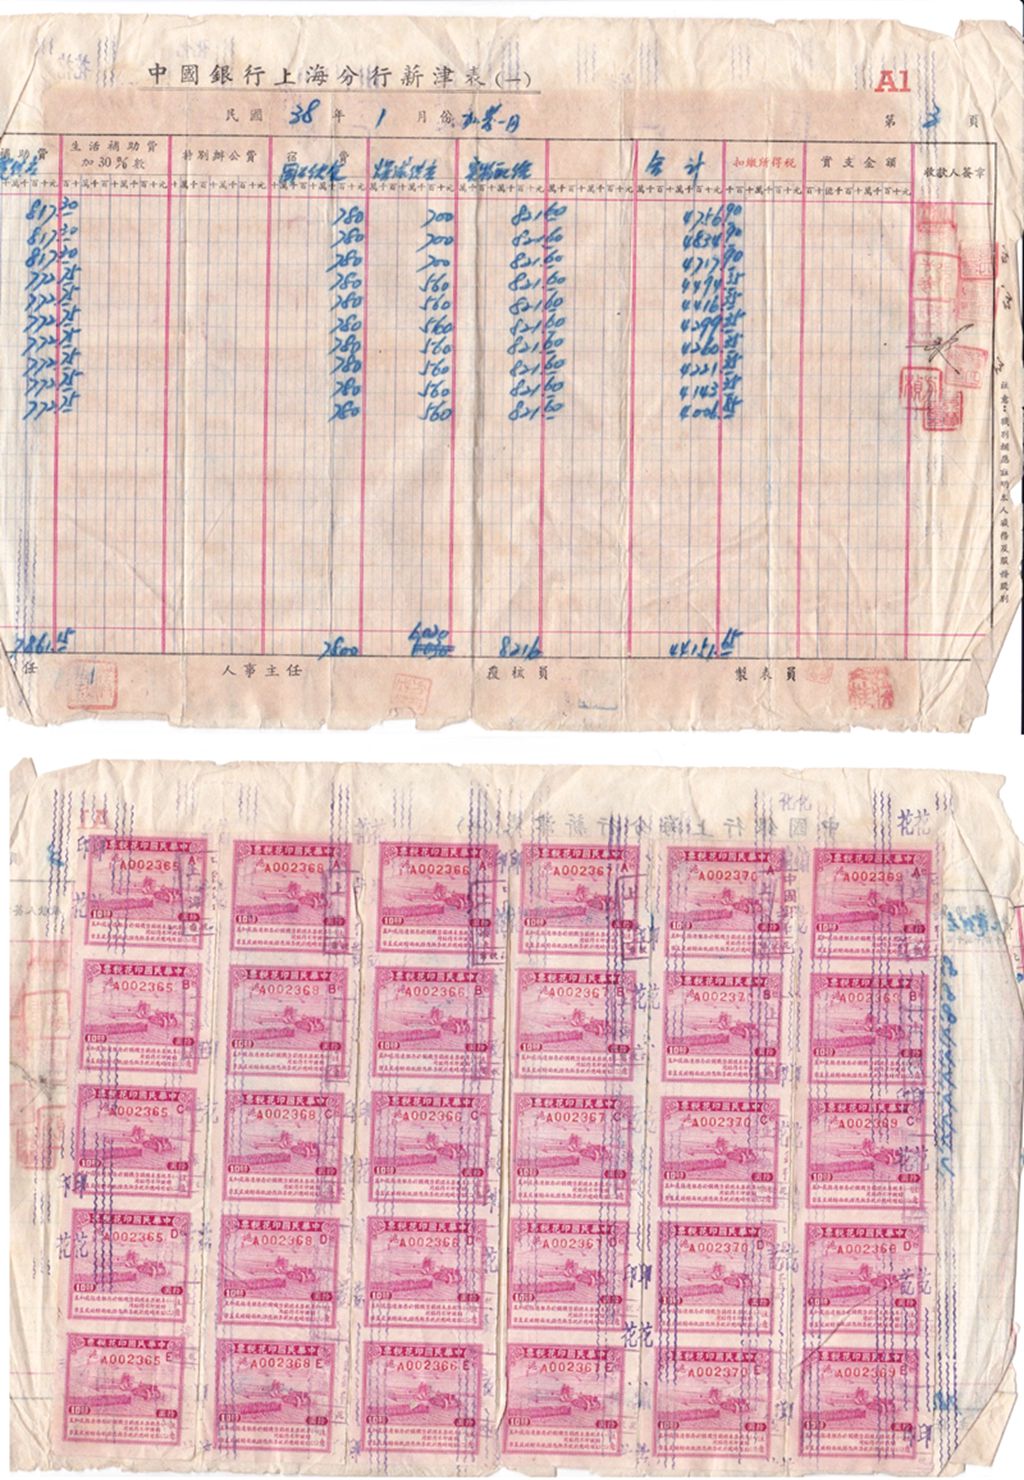 R2917, Bank of China 1949 Salary Tax Sheet, with 30 Pcs Large Revenue Stamps